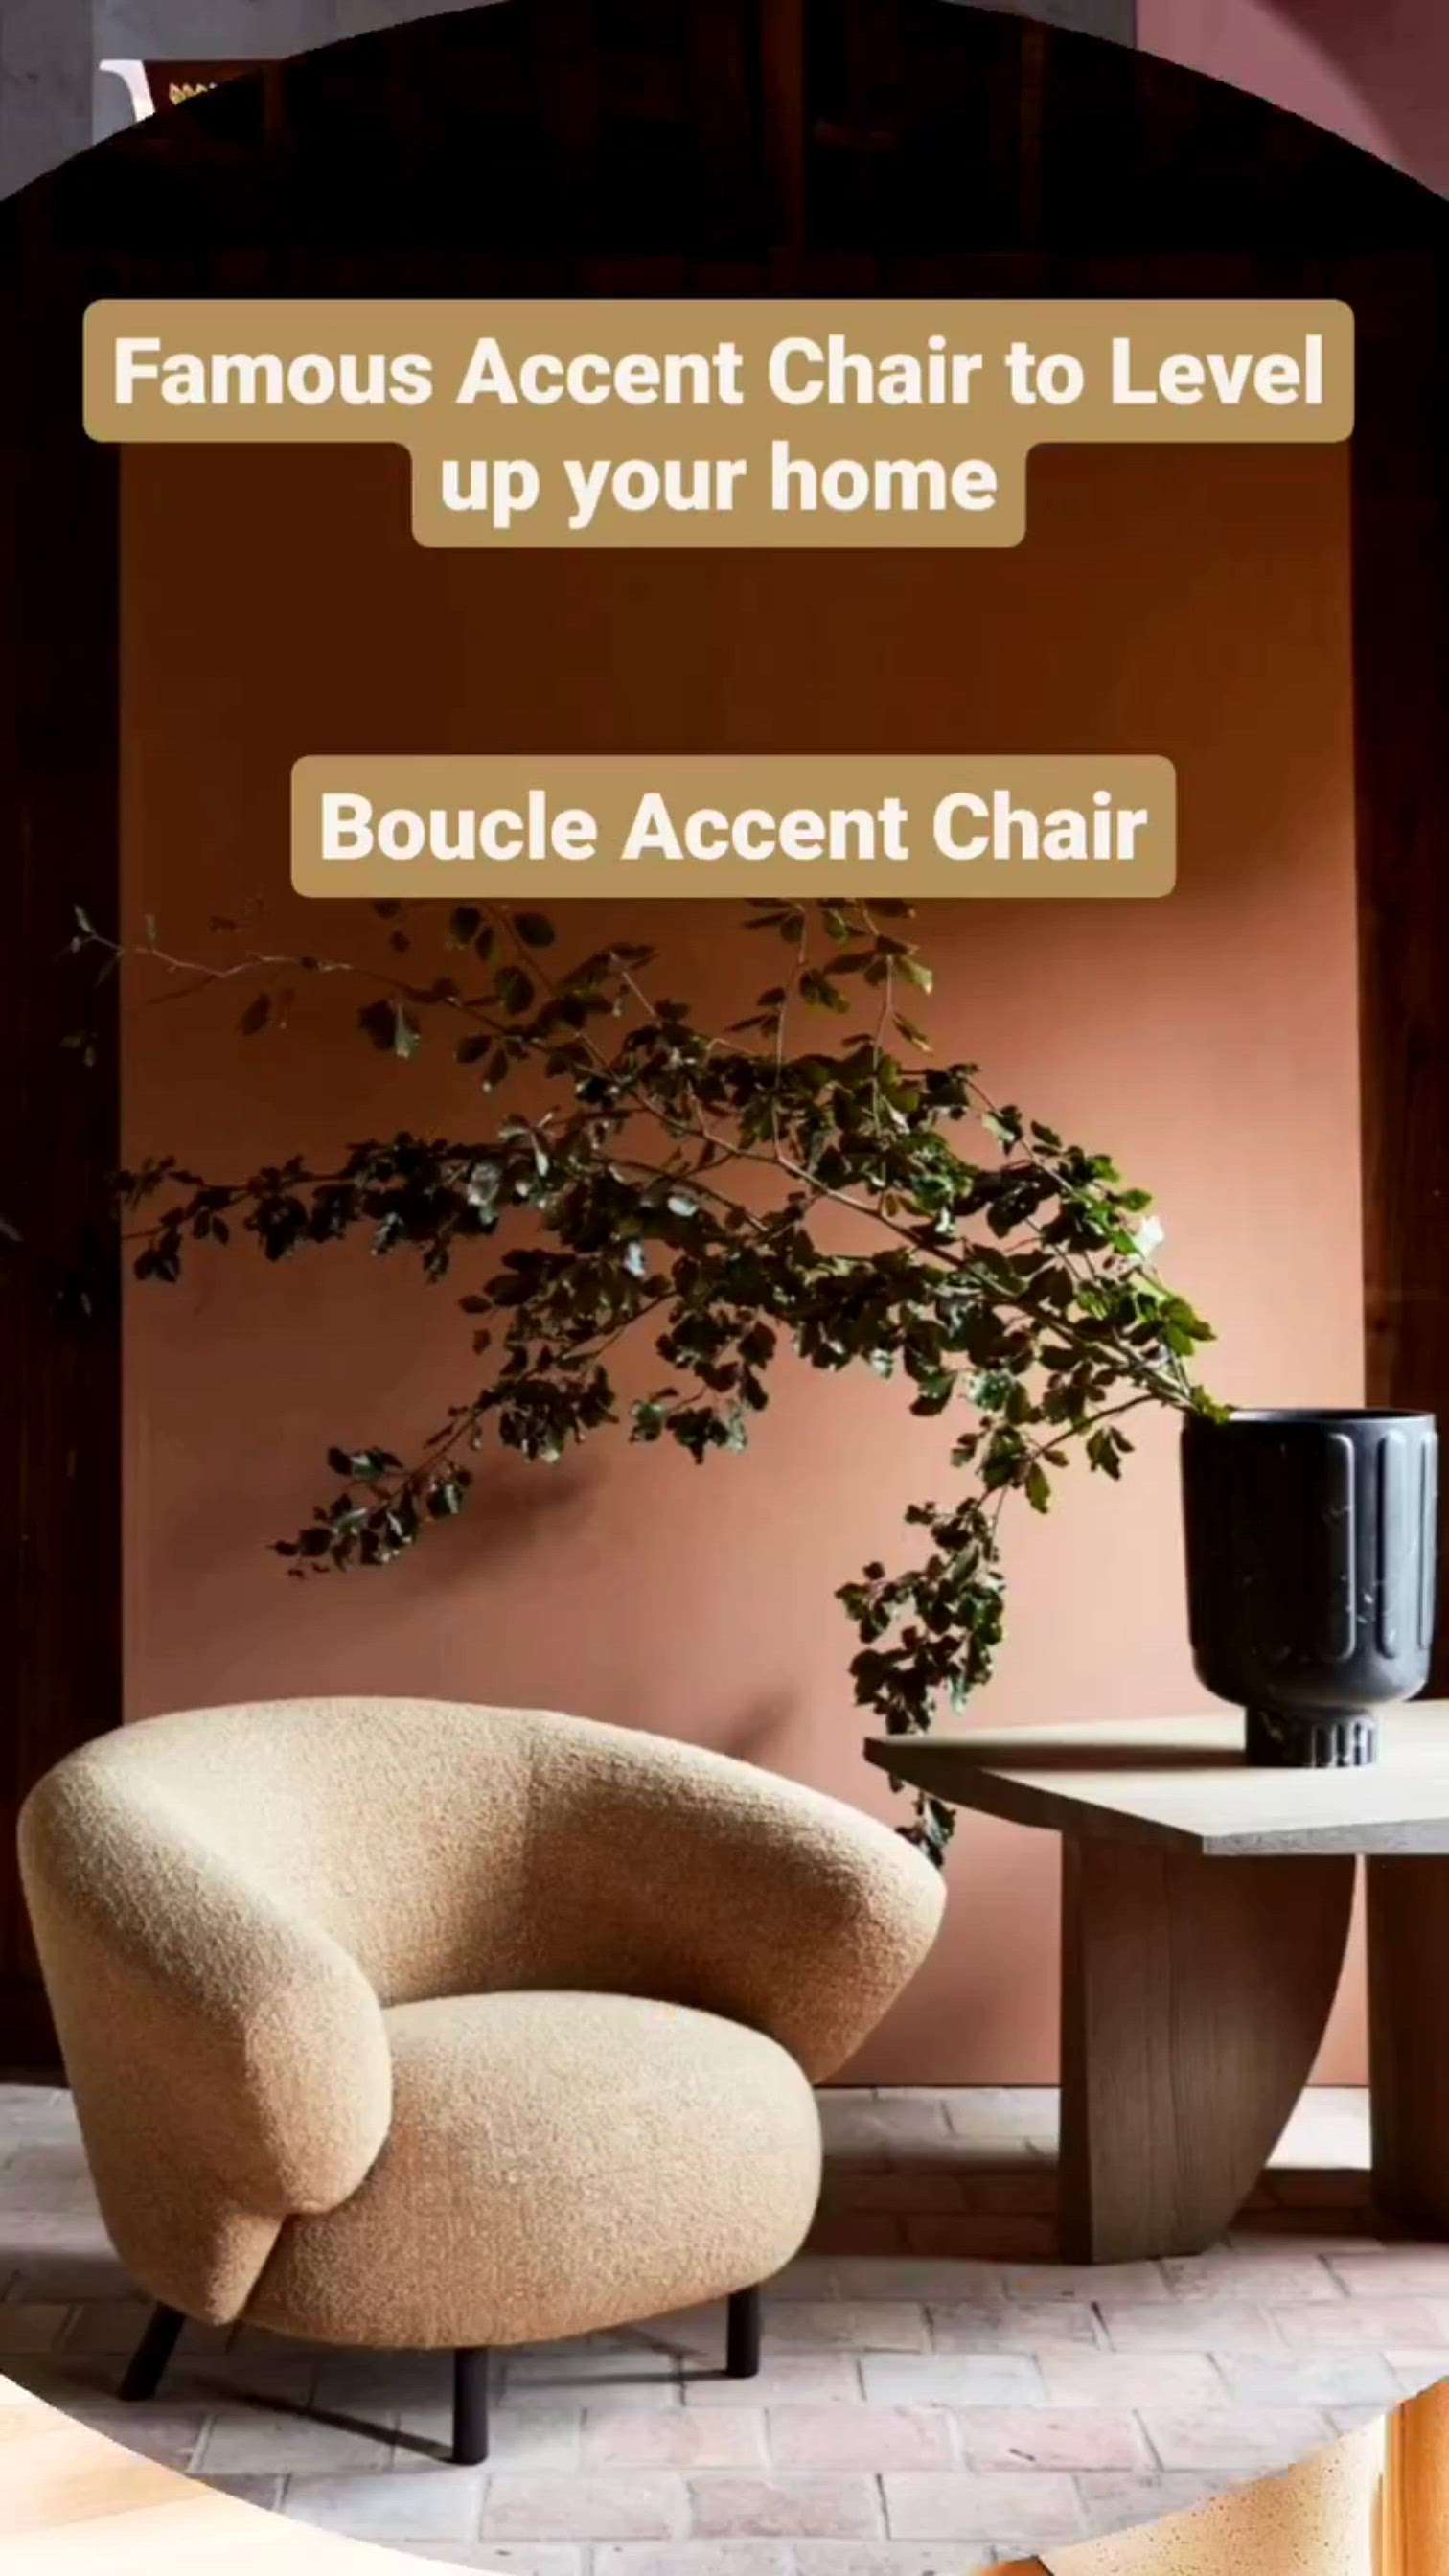 🪑✨ Best Accent Chairs to Level Up your Home 🏠
These chairs will make your living room more aesthetically appealing. 

1. Boucle 
2. Leather 
3. Sherpa 
4. Cane Back
5. Upholstered Barrel Back 
6. Swivel 

Let us know your Favourite Accent Chair in the comment section below 🪑

#chair&table  #chairdesign  #accentchair  #trendingdecor  #InteriorDesigner  #designdetails  #trendinginteriors #DiningChairs  #LivingroomDesigns #architectsindelhi  #interiorstyling  #delhigram